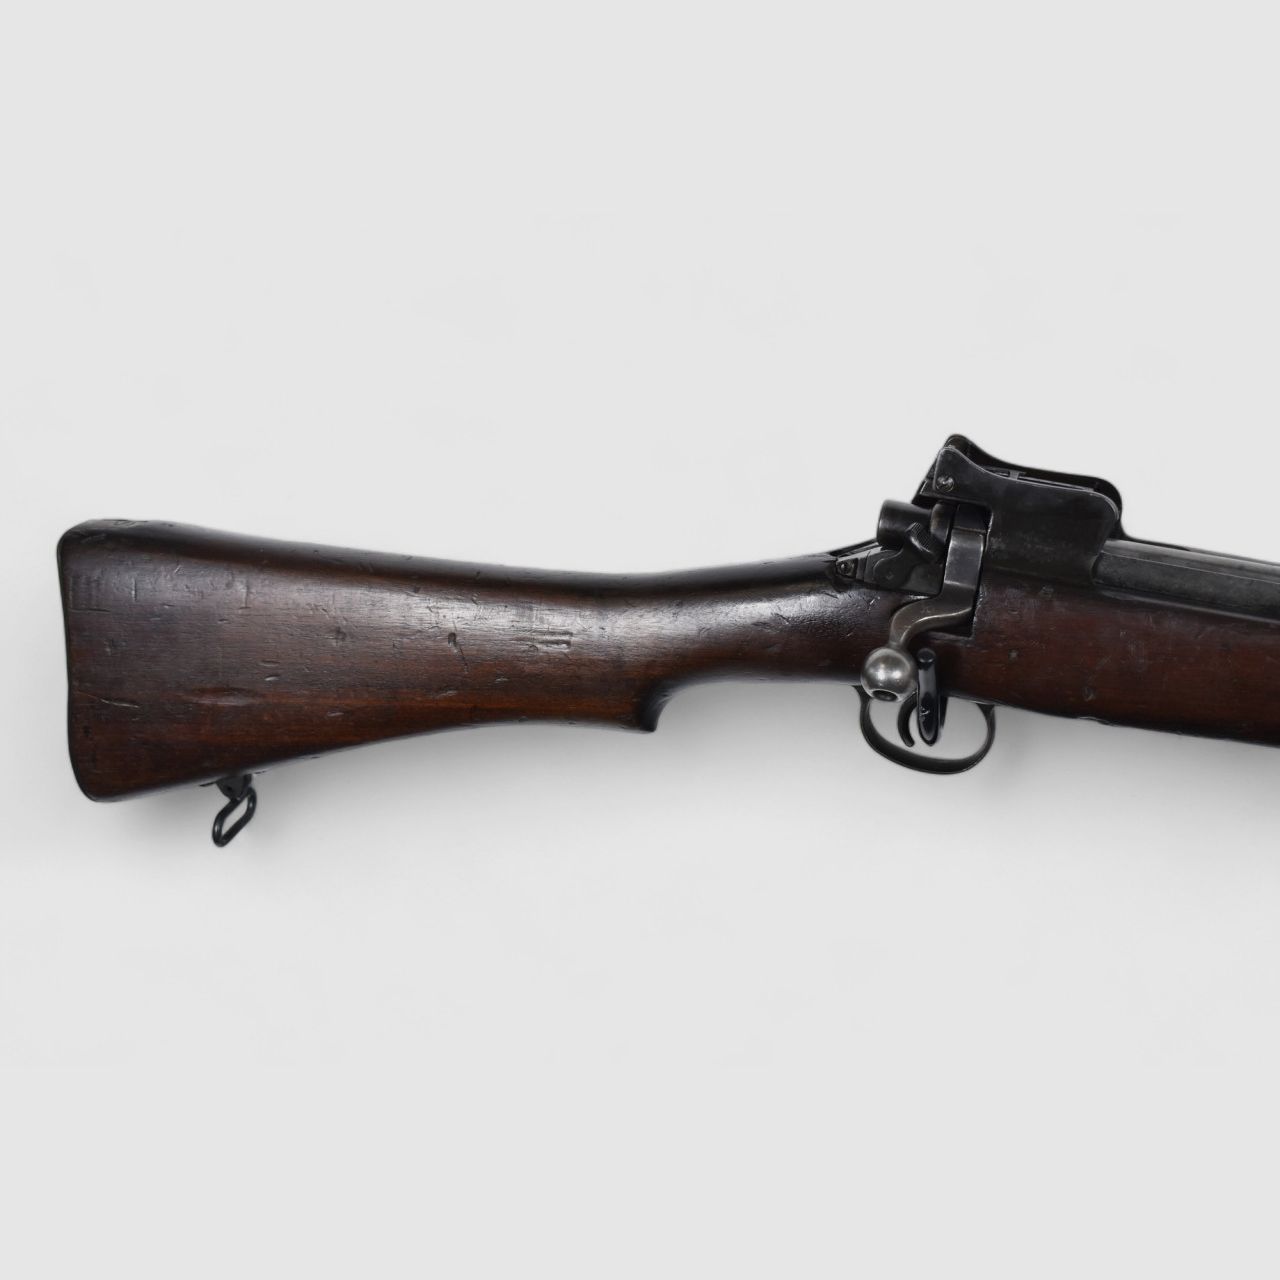 Enfield P 17 Winchester .30-06Spring Repetierbüchse